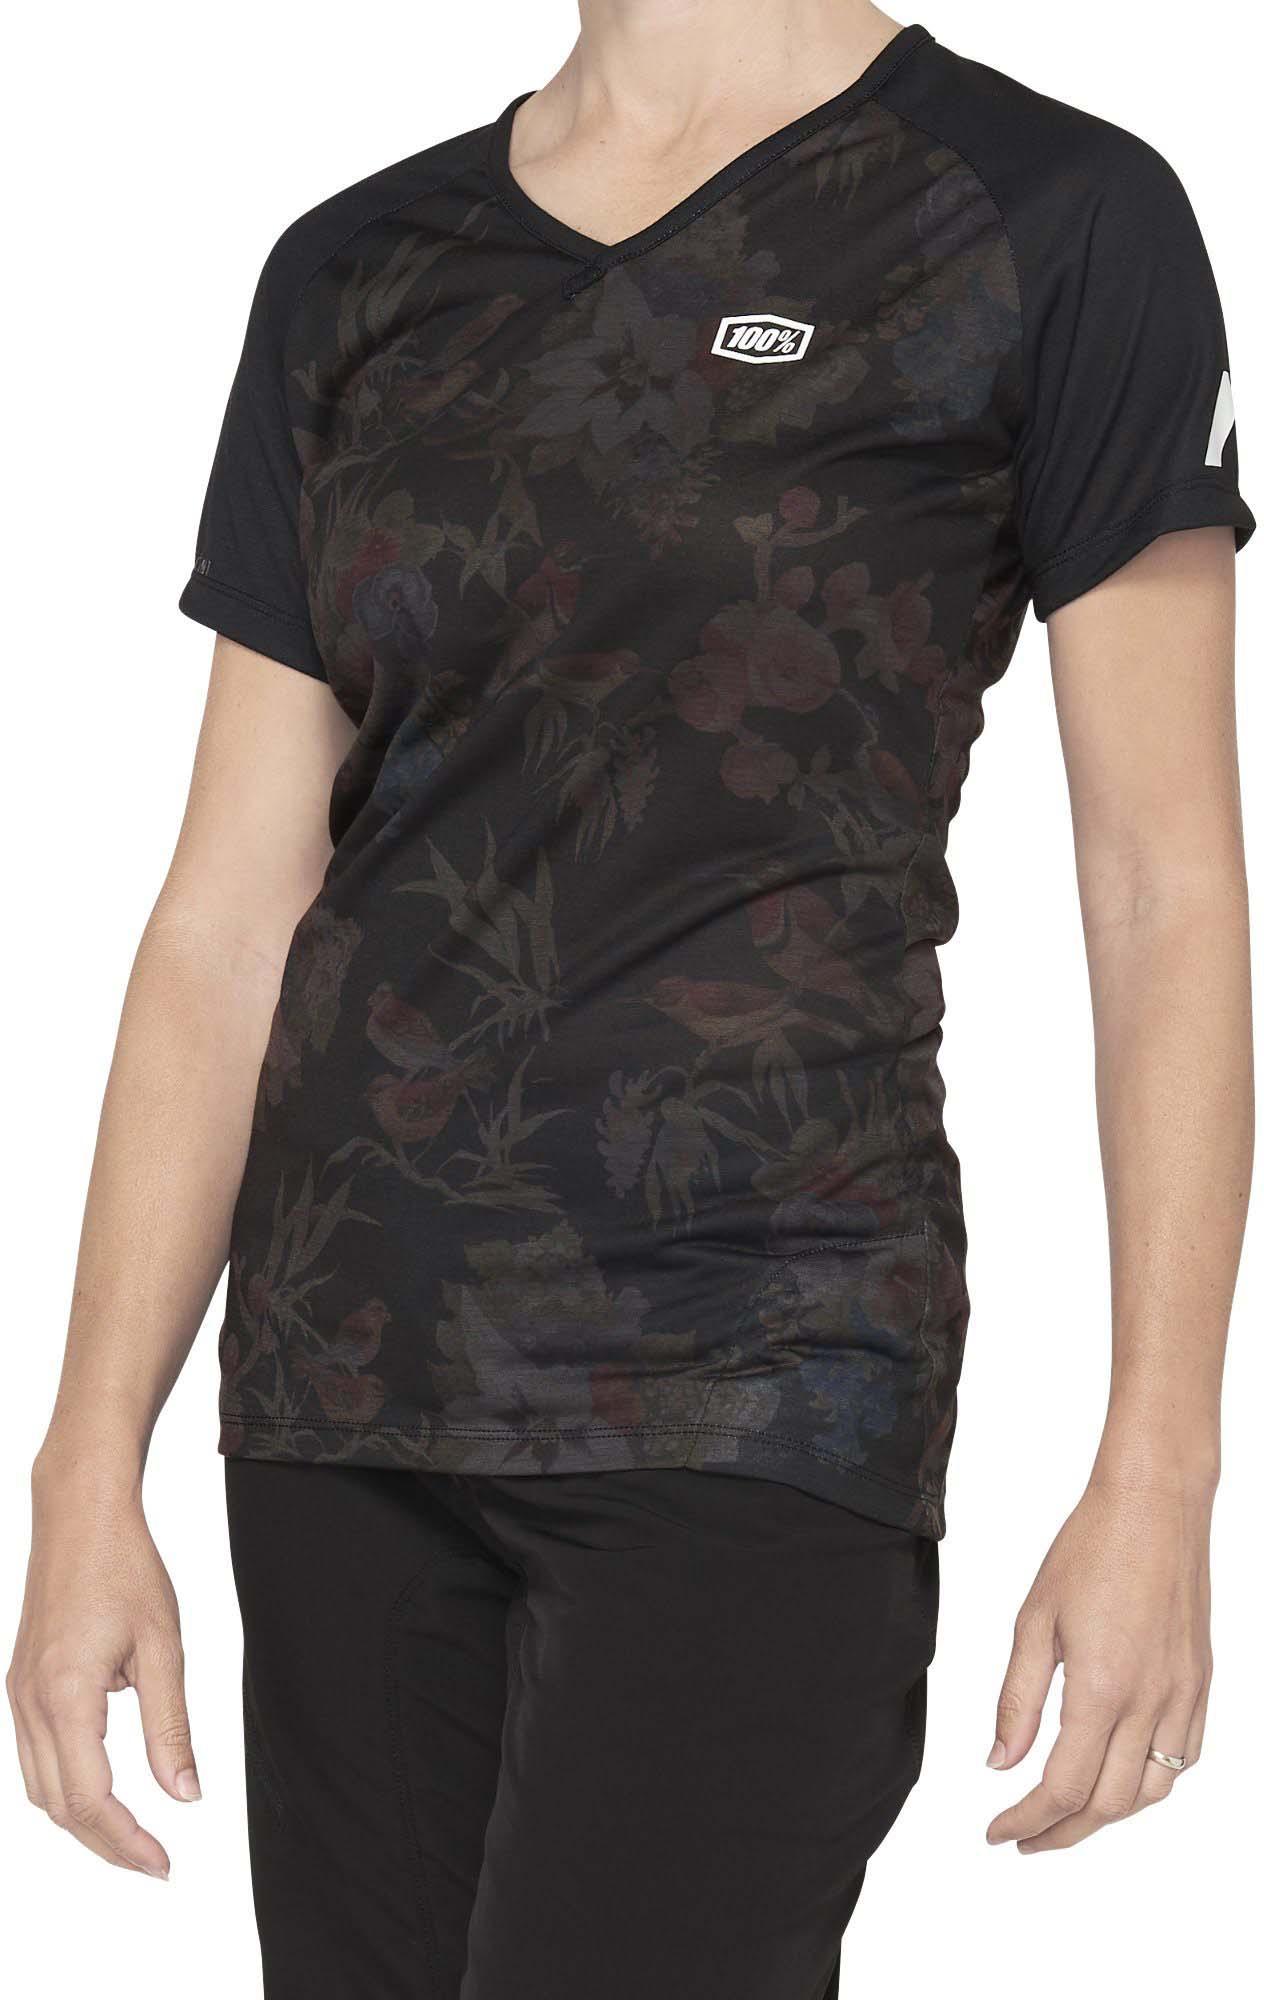 100% Womens Airmatic Jersey Ss19  Black Floral